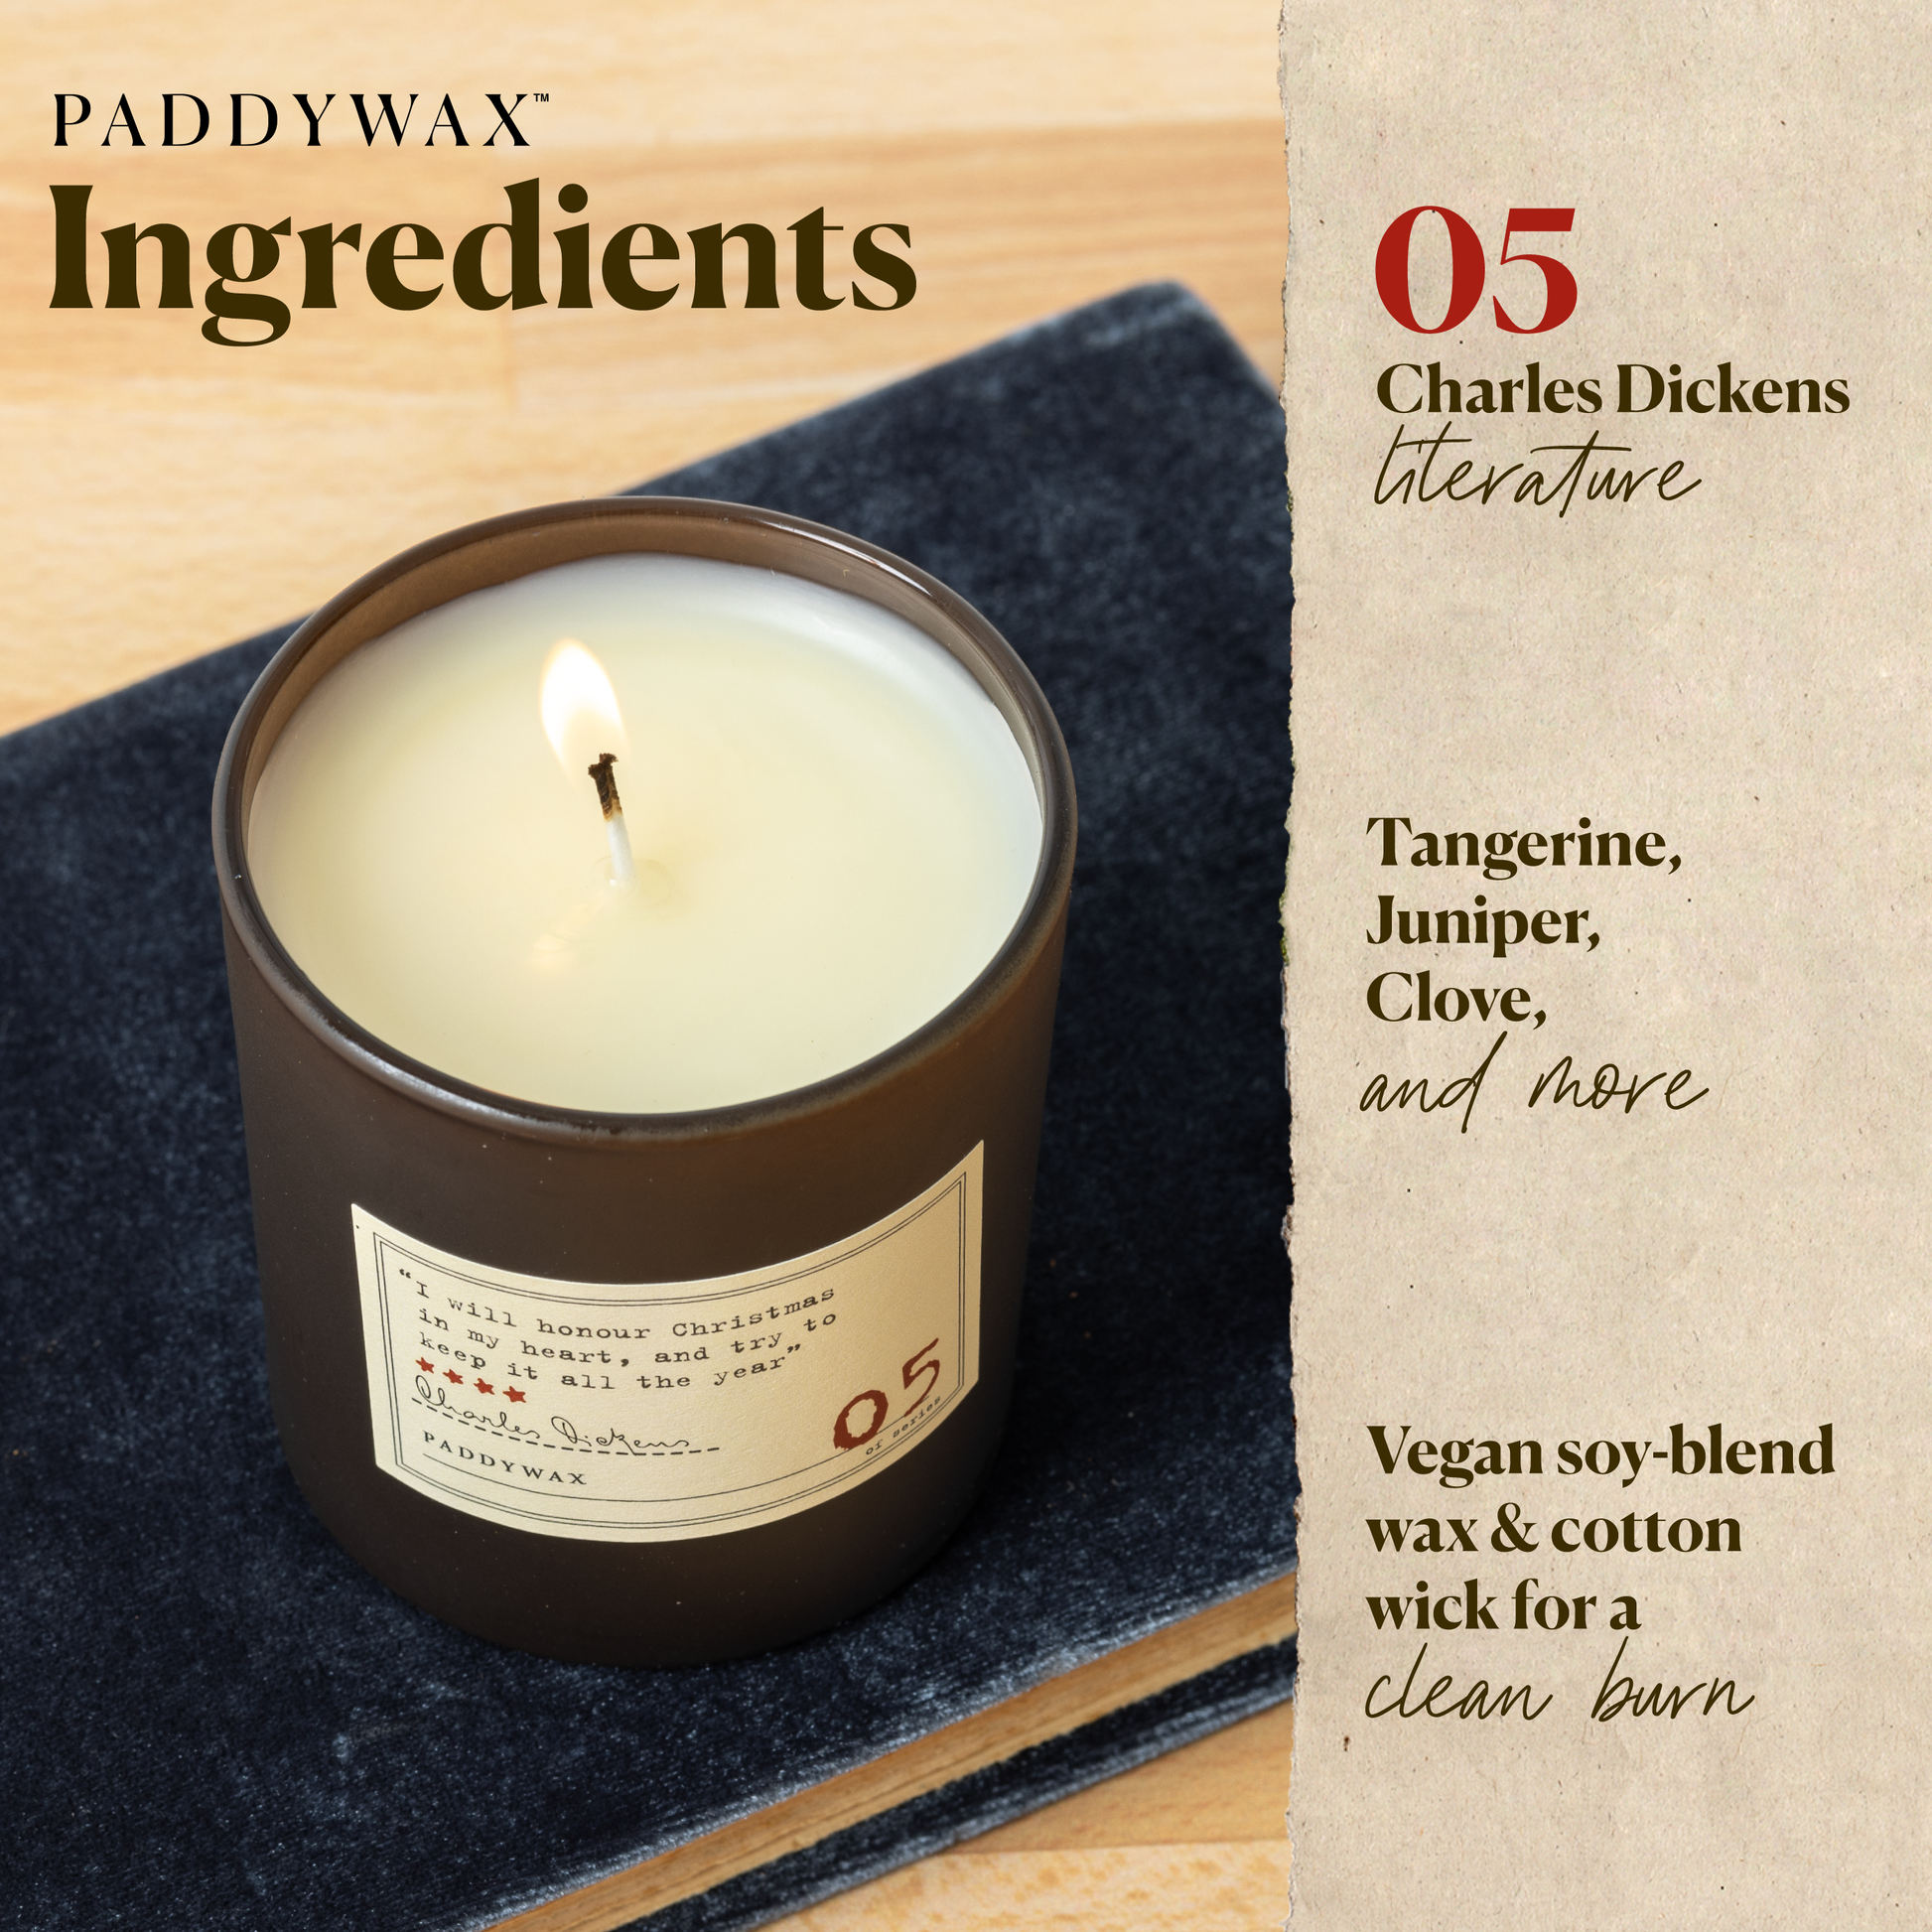 Photo of the Charles Dickens Library candle with a list of ingredients. Tangerine, Juniper, Clove, and more. Vegan soy blend wax and cotton wick for a clean burn.